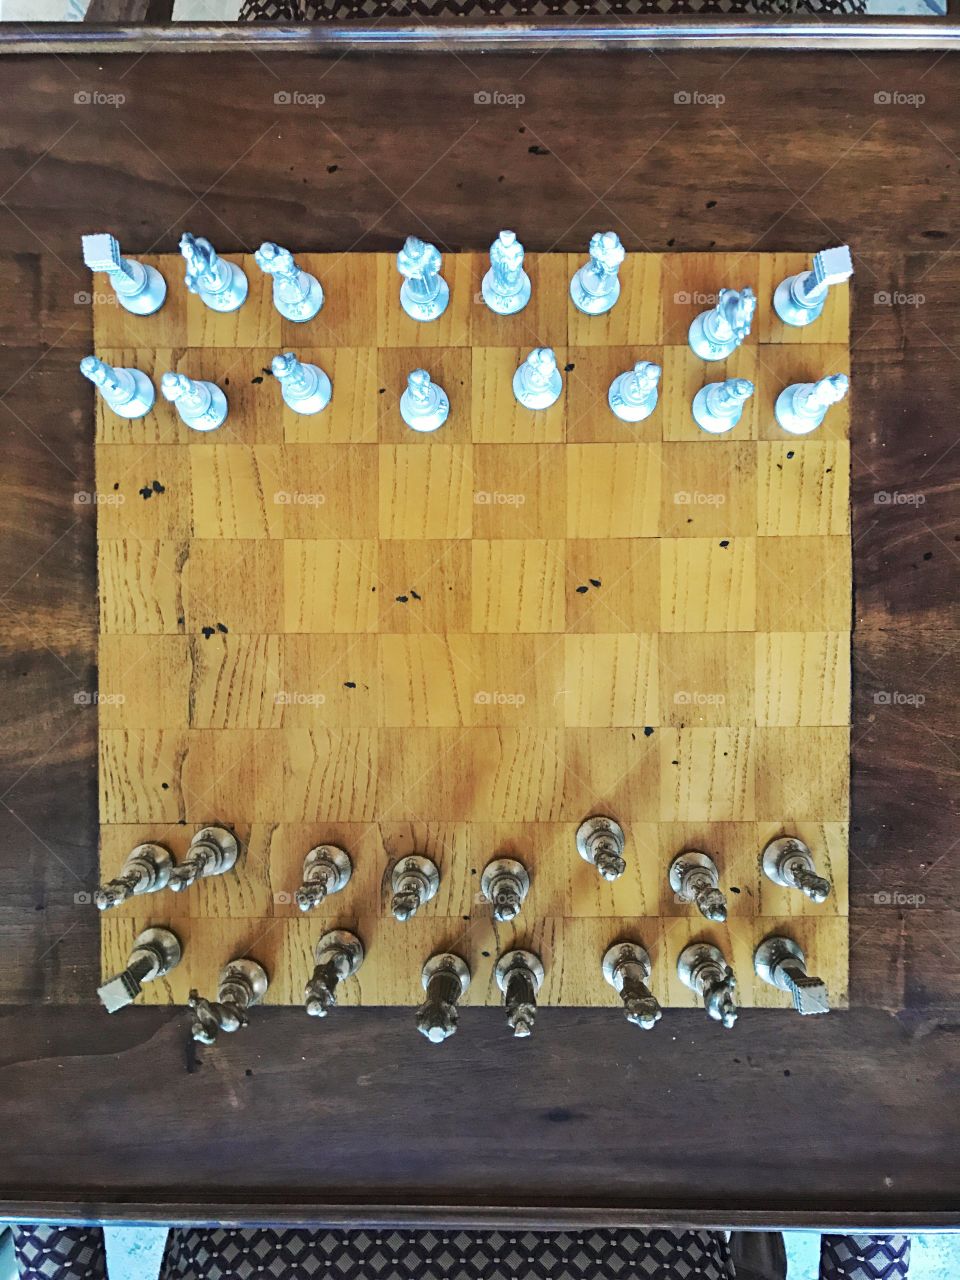 Chess board from above 